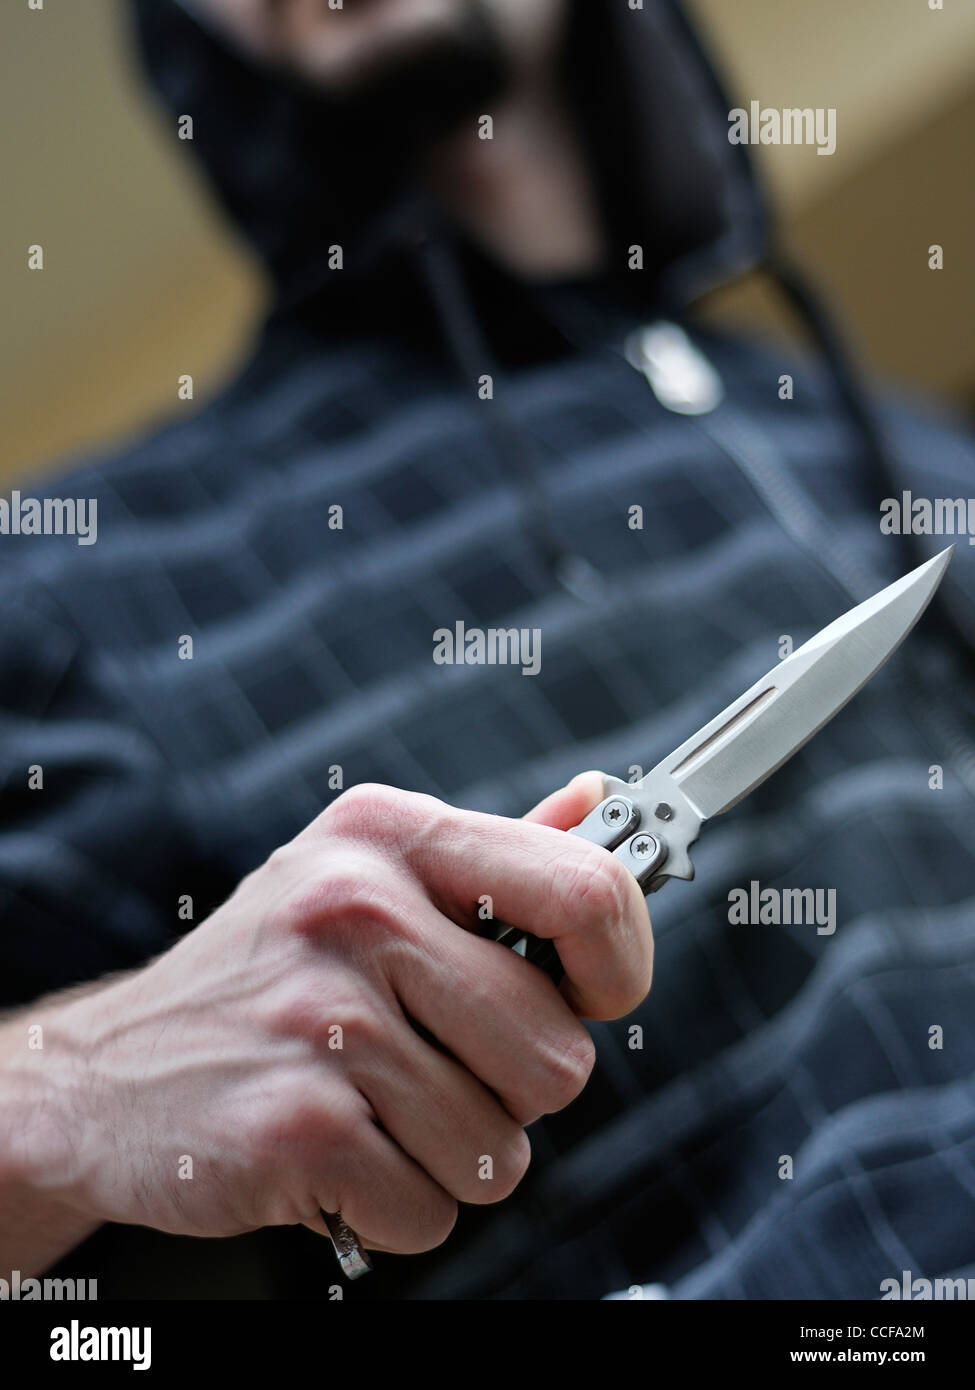 Knife Crime. Hooded Male Brandishing a Butterfly Knife. Stock Photo